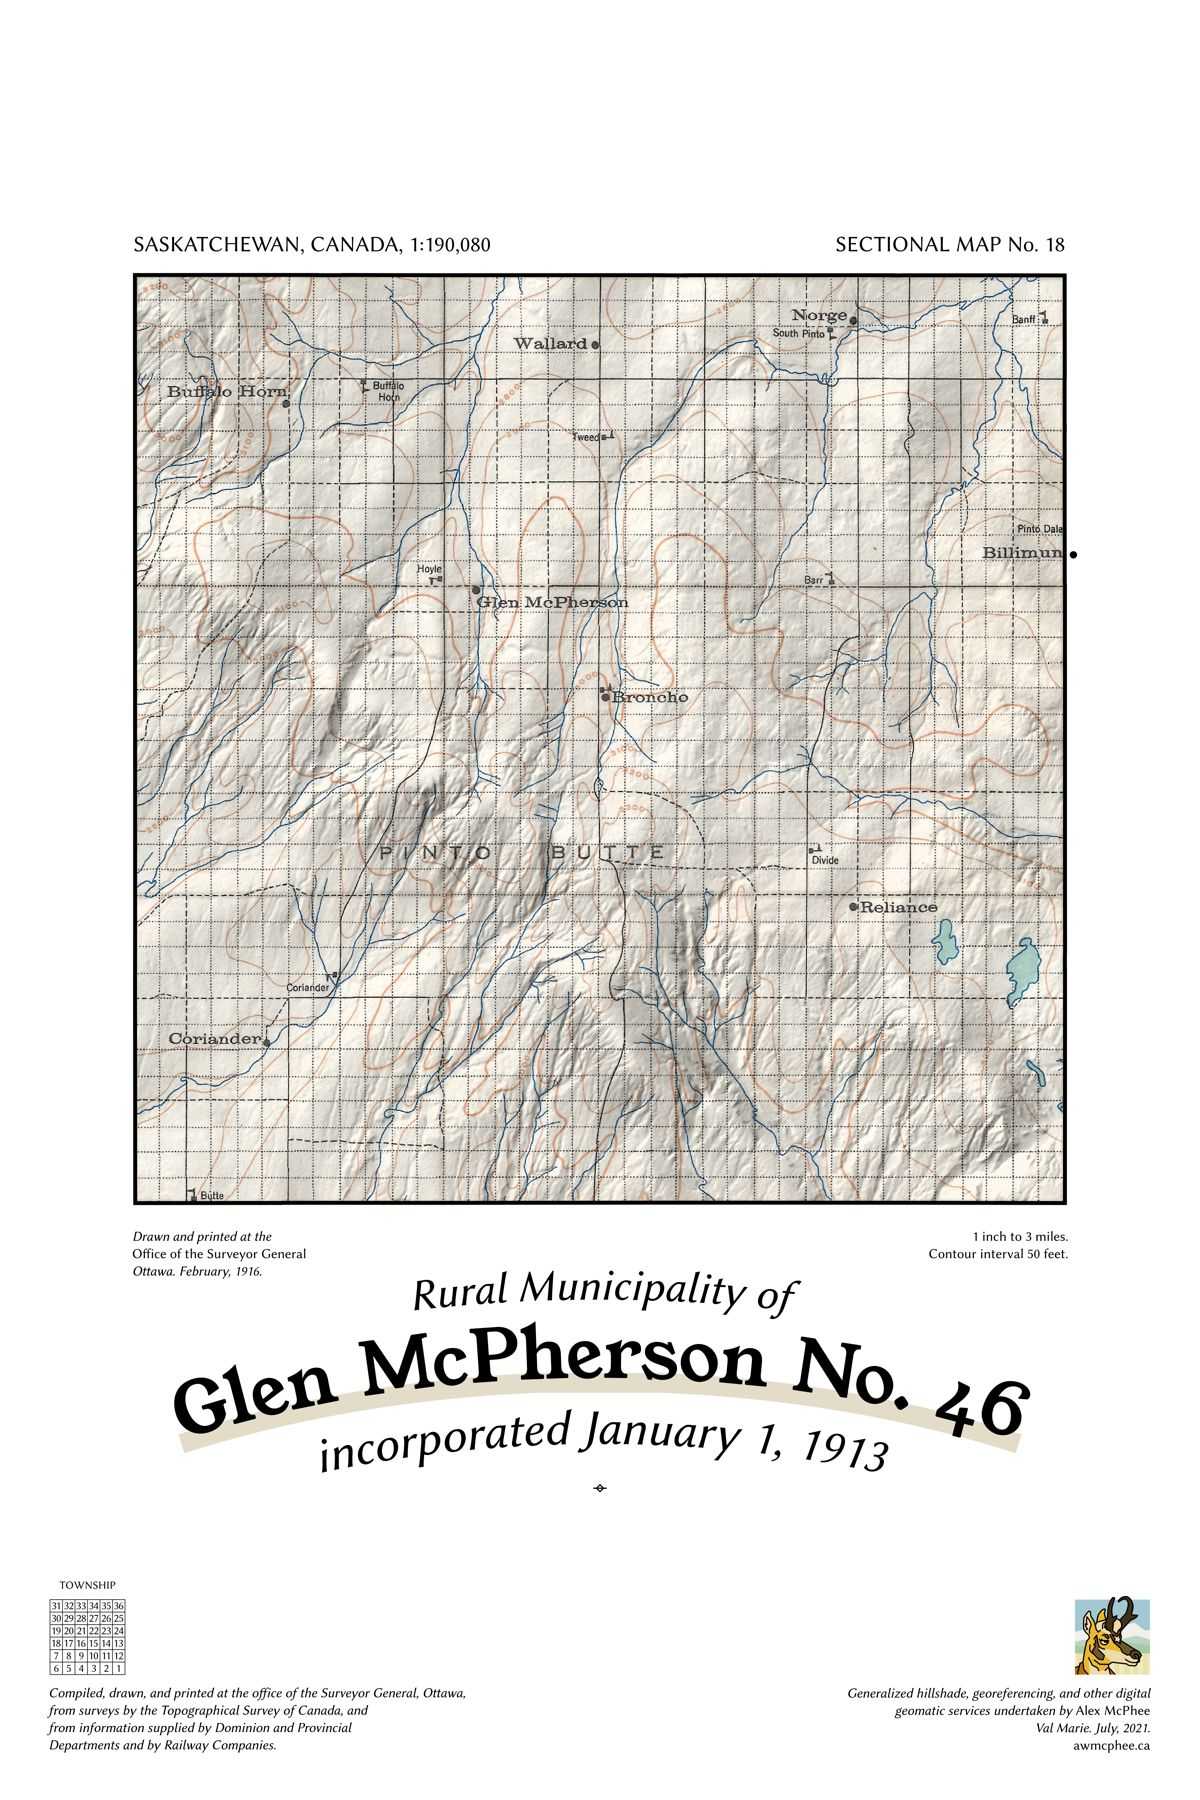 A map of the Rural Municipality of Glen McPherson No. 46.